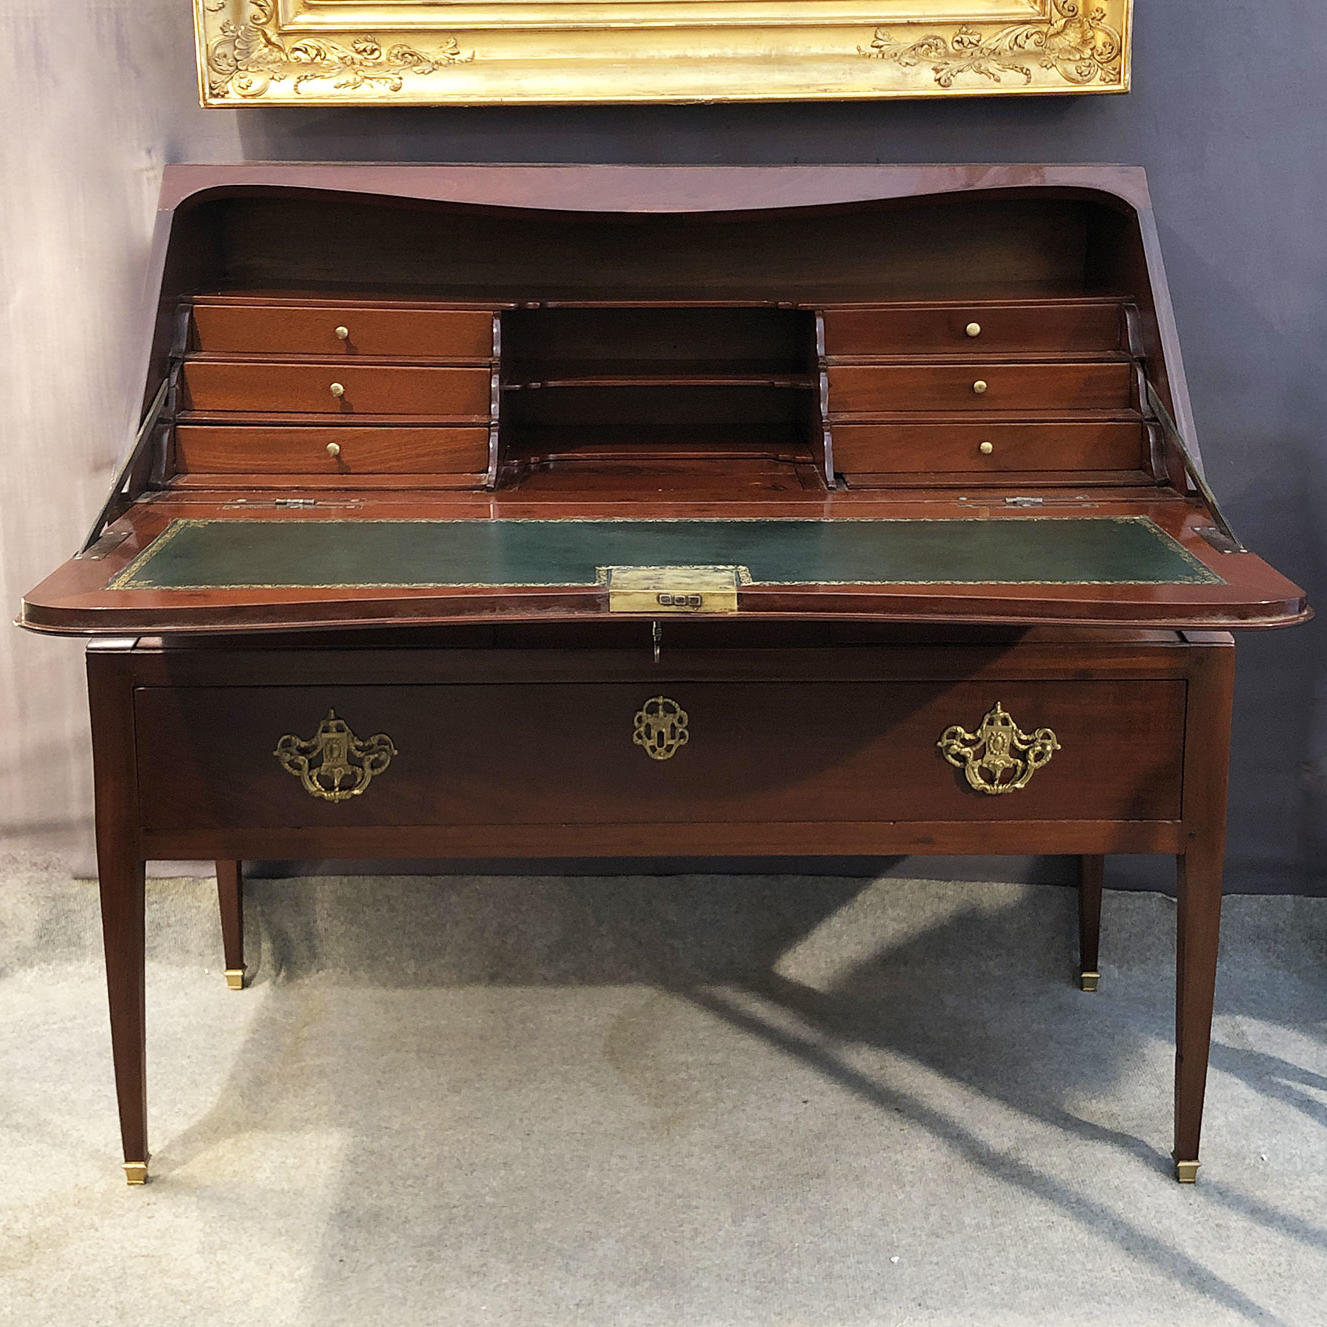 Writing Cabinet in Cuban Mahogany. Bordeaux, France, Late 18th century / Early 19th century